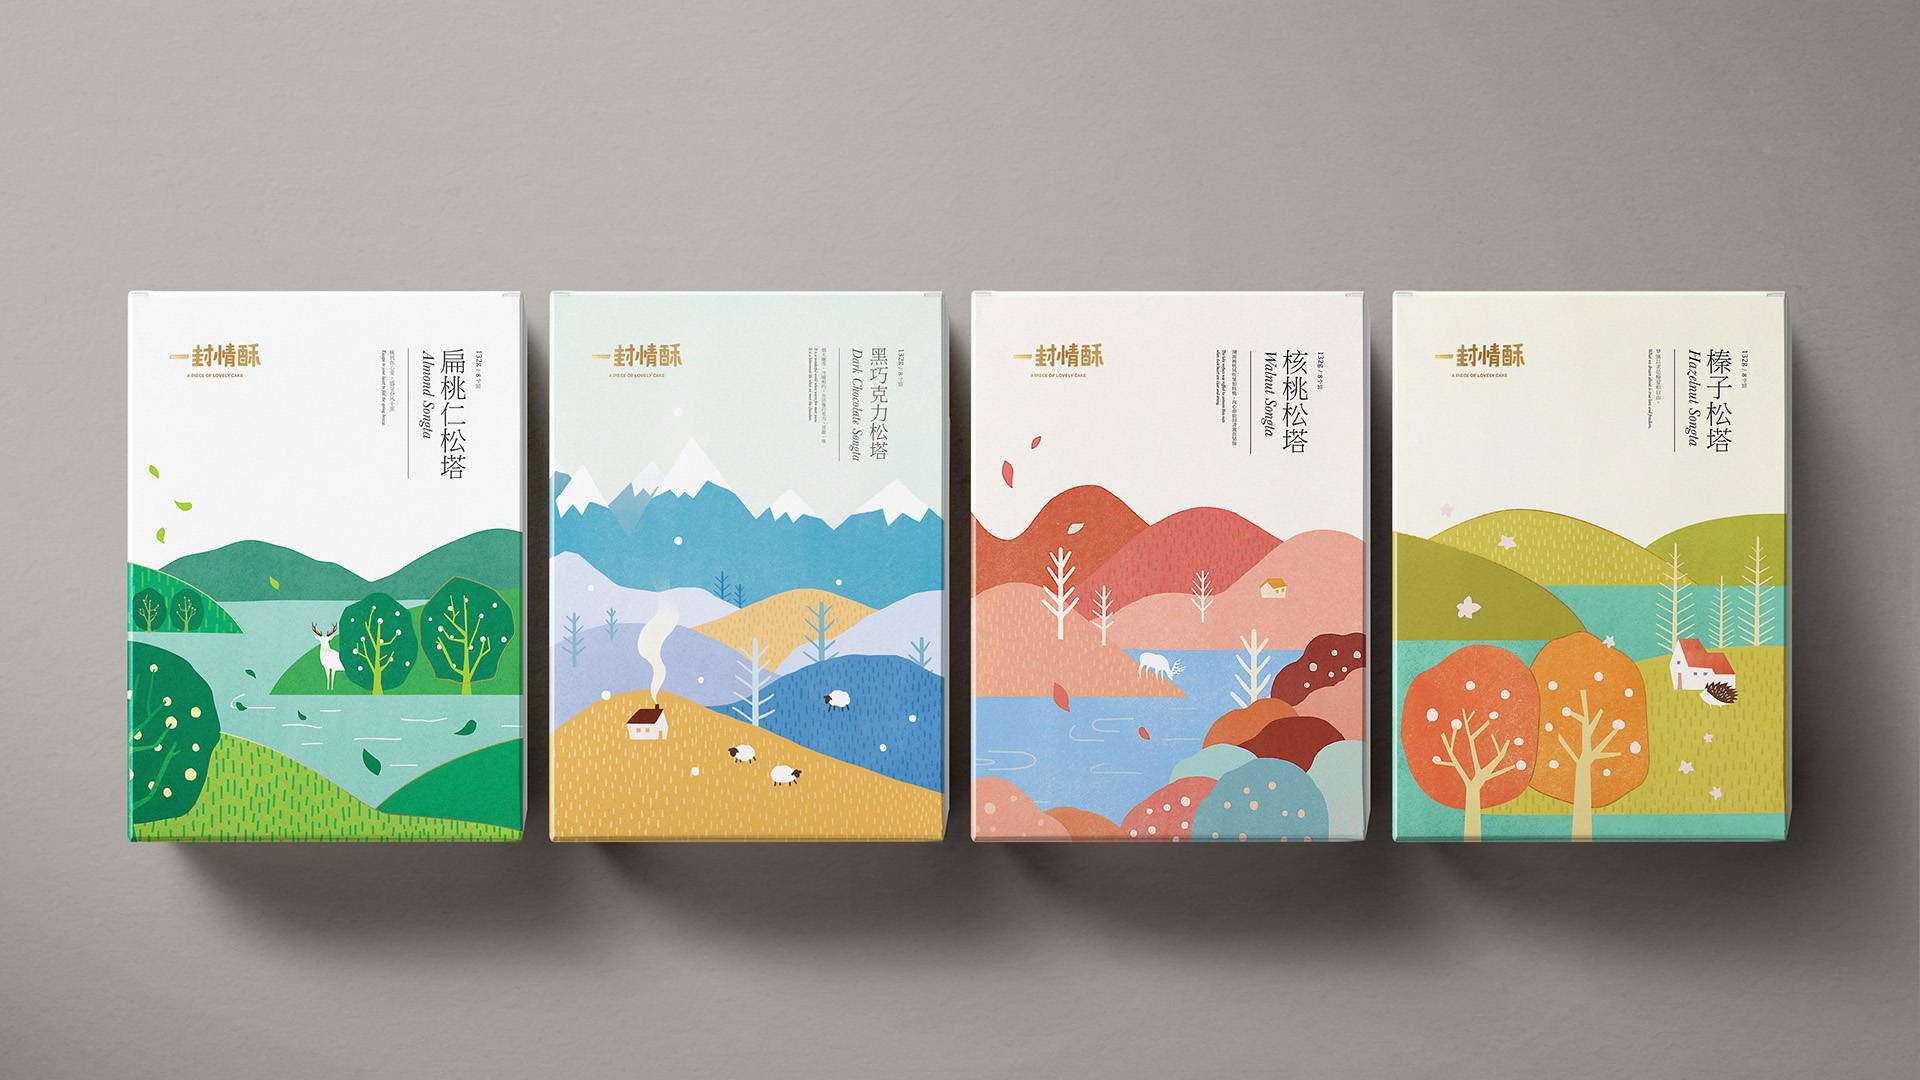 Featured image for This Puff Pastry Packaging Has Beautiful Flat Graphic Illustrations